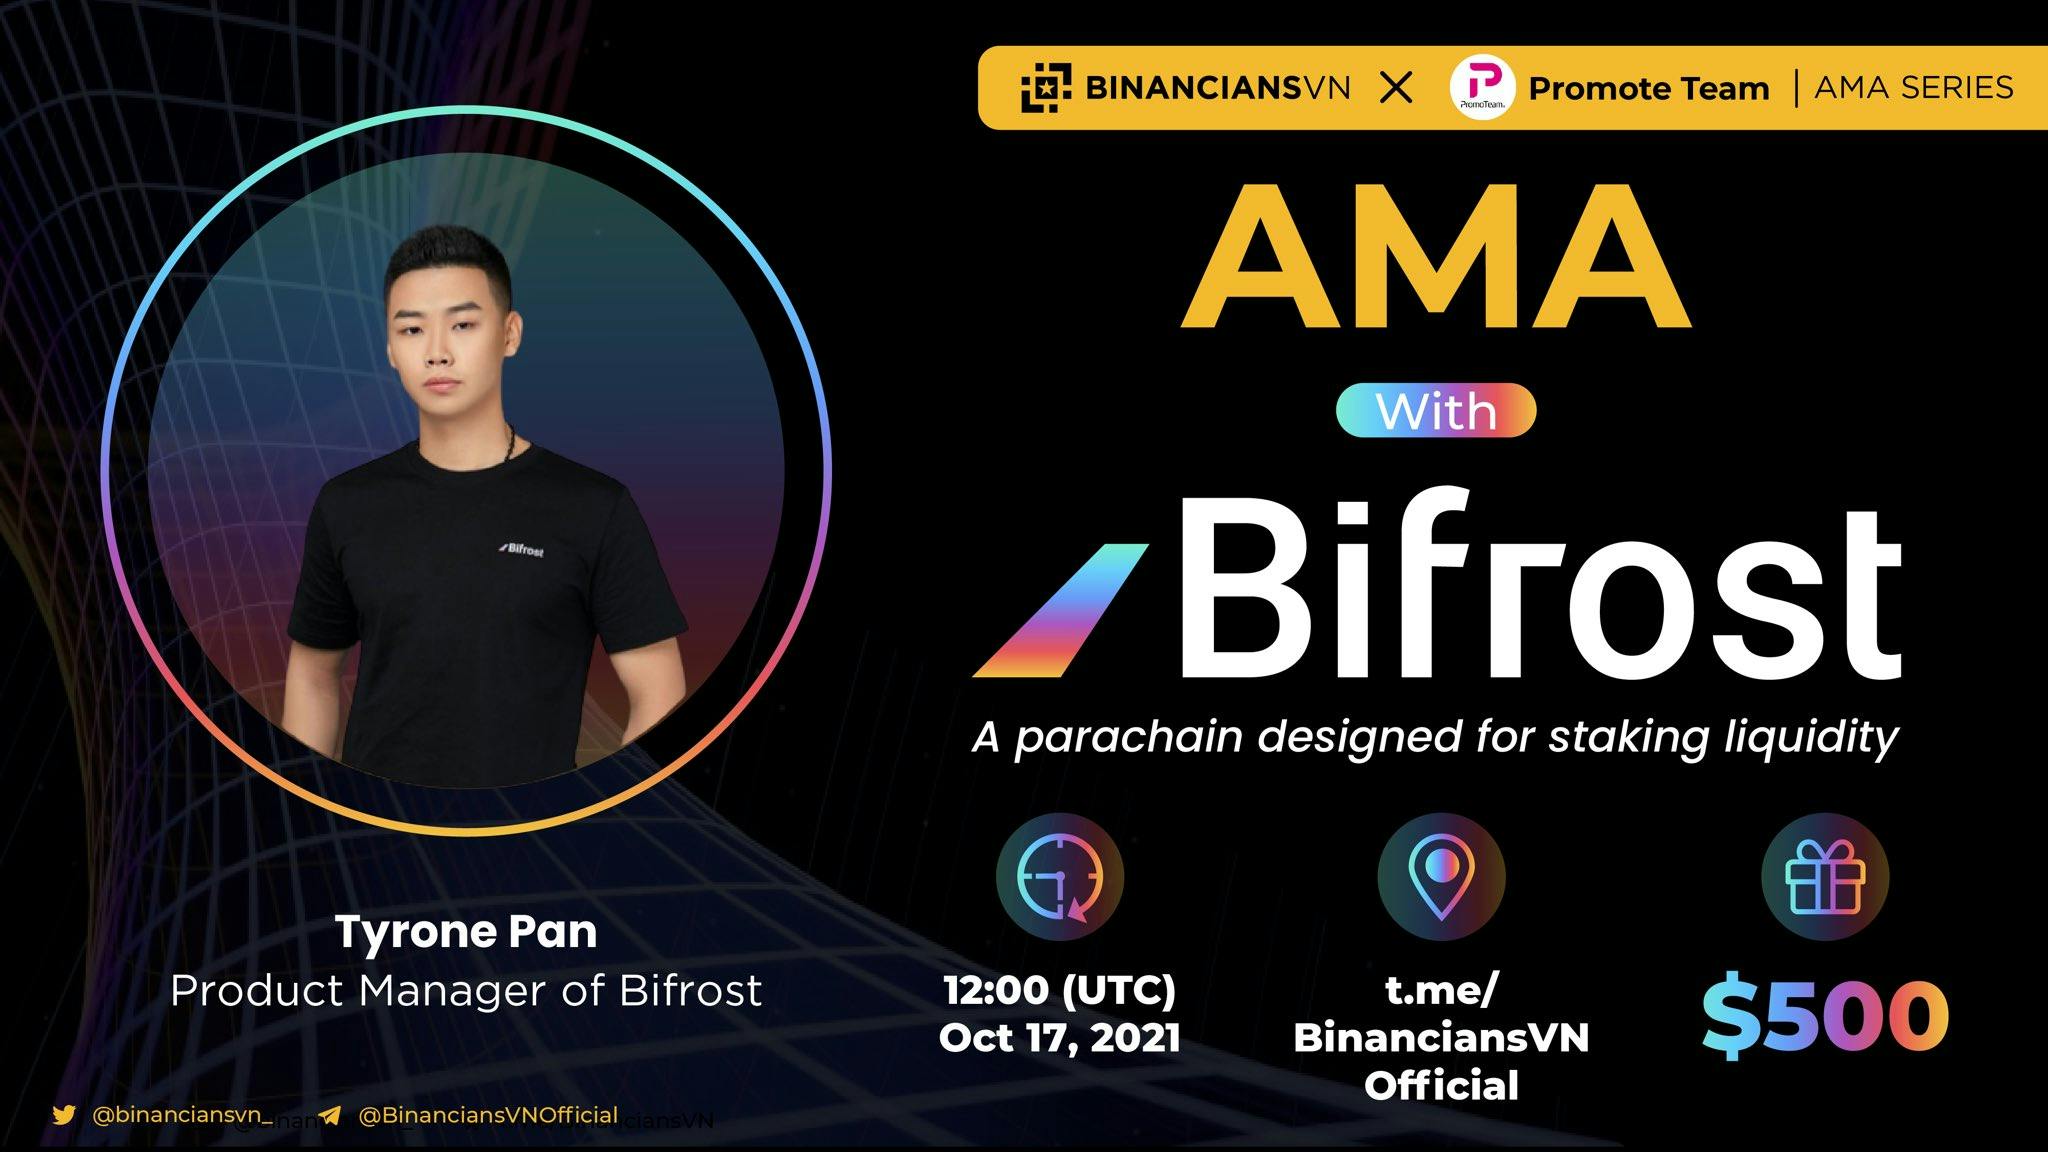 Come & meet Tyrone Pan PM of Bifrost to learn more about their upcoming strategies for DOT auctions